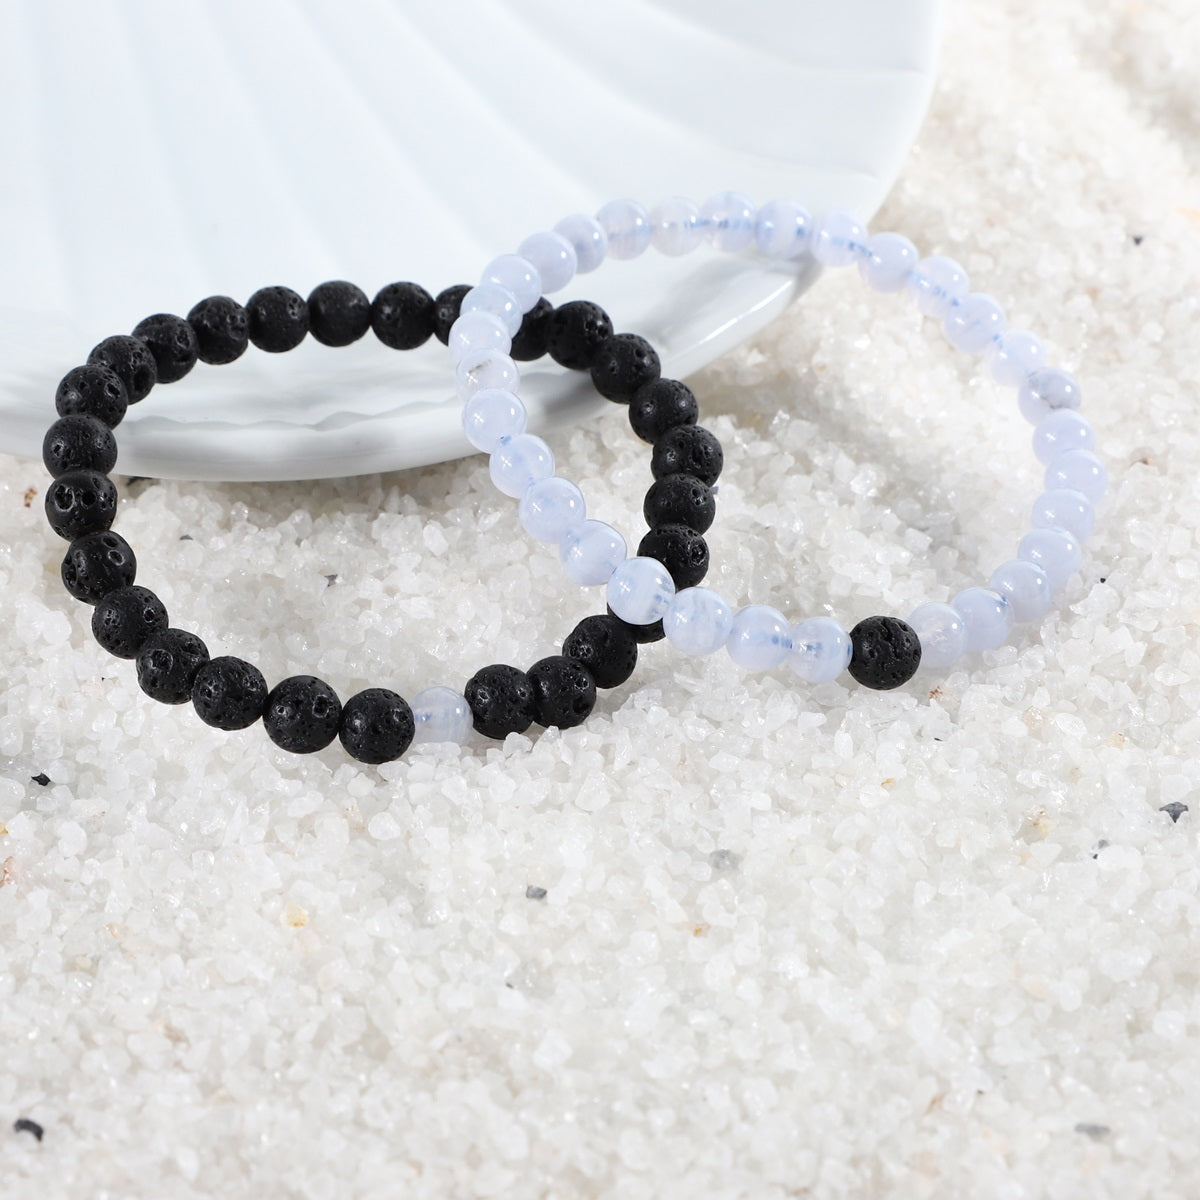 Detailed view of a 6mm Lava bead, highlighting the porous texture for aromatherapy infusion and symbolizing grounding strength in the bracelet combo